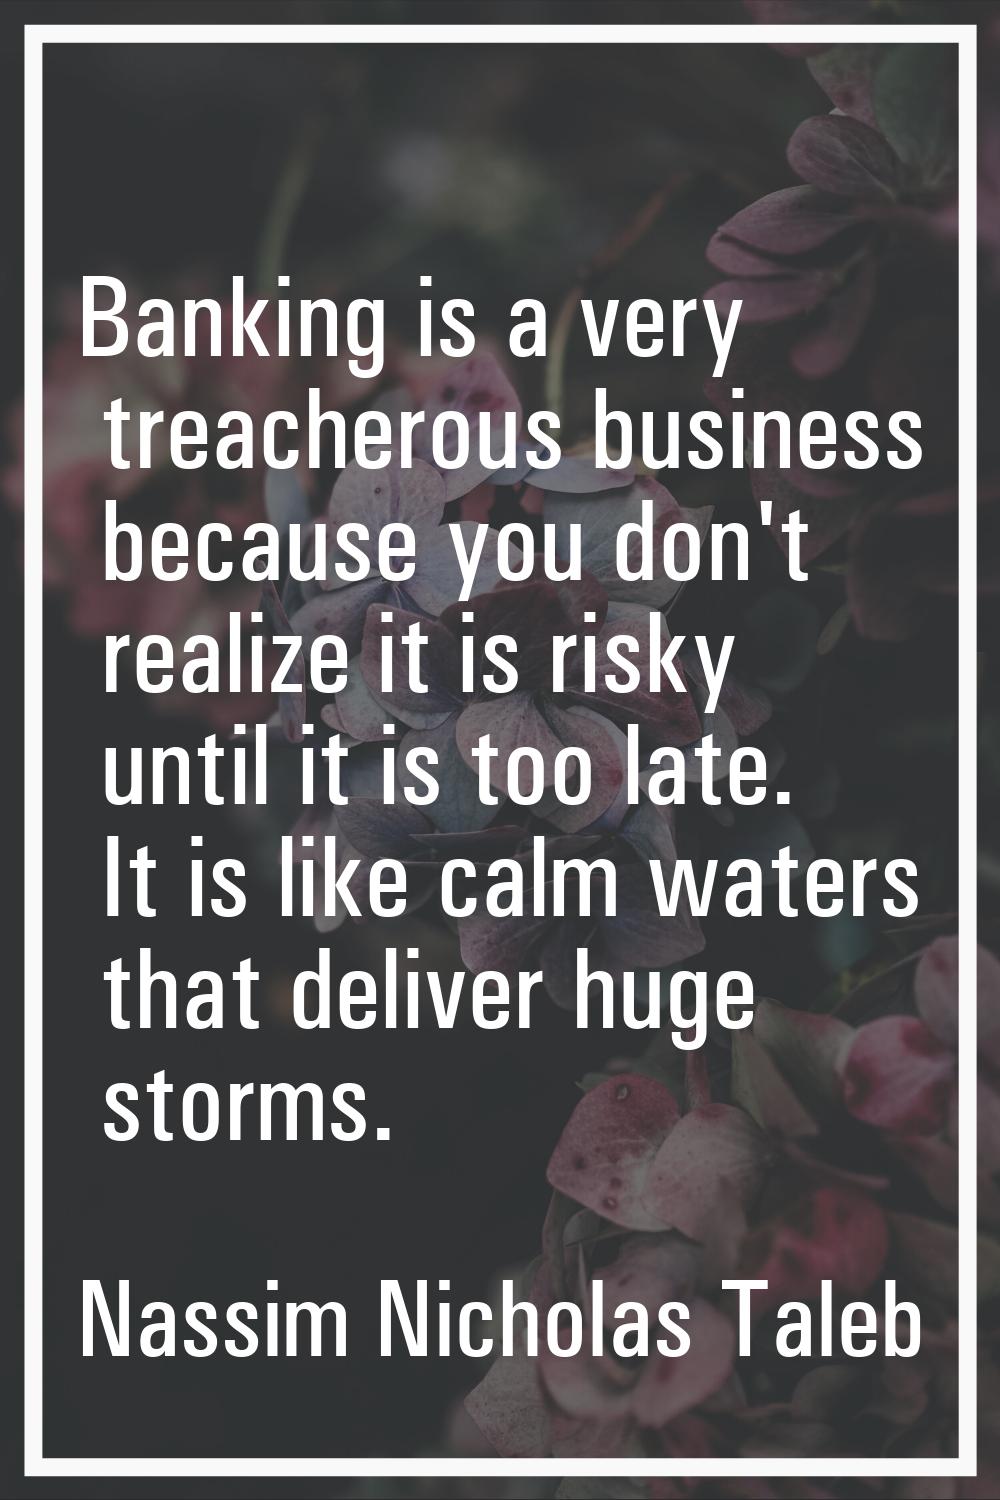 Banking is a very treacherous business because you don't realize it is risky until it is too late. 